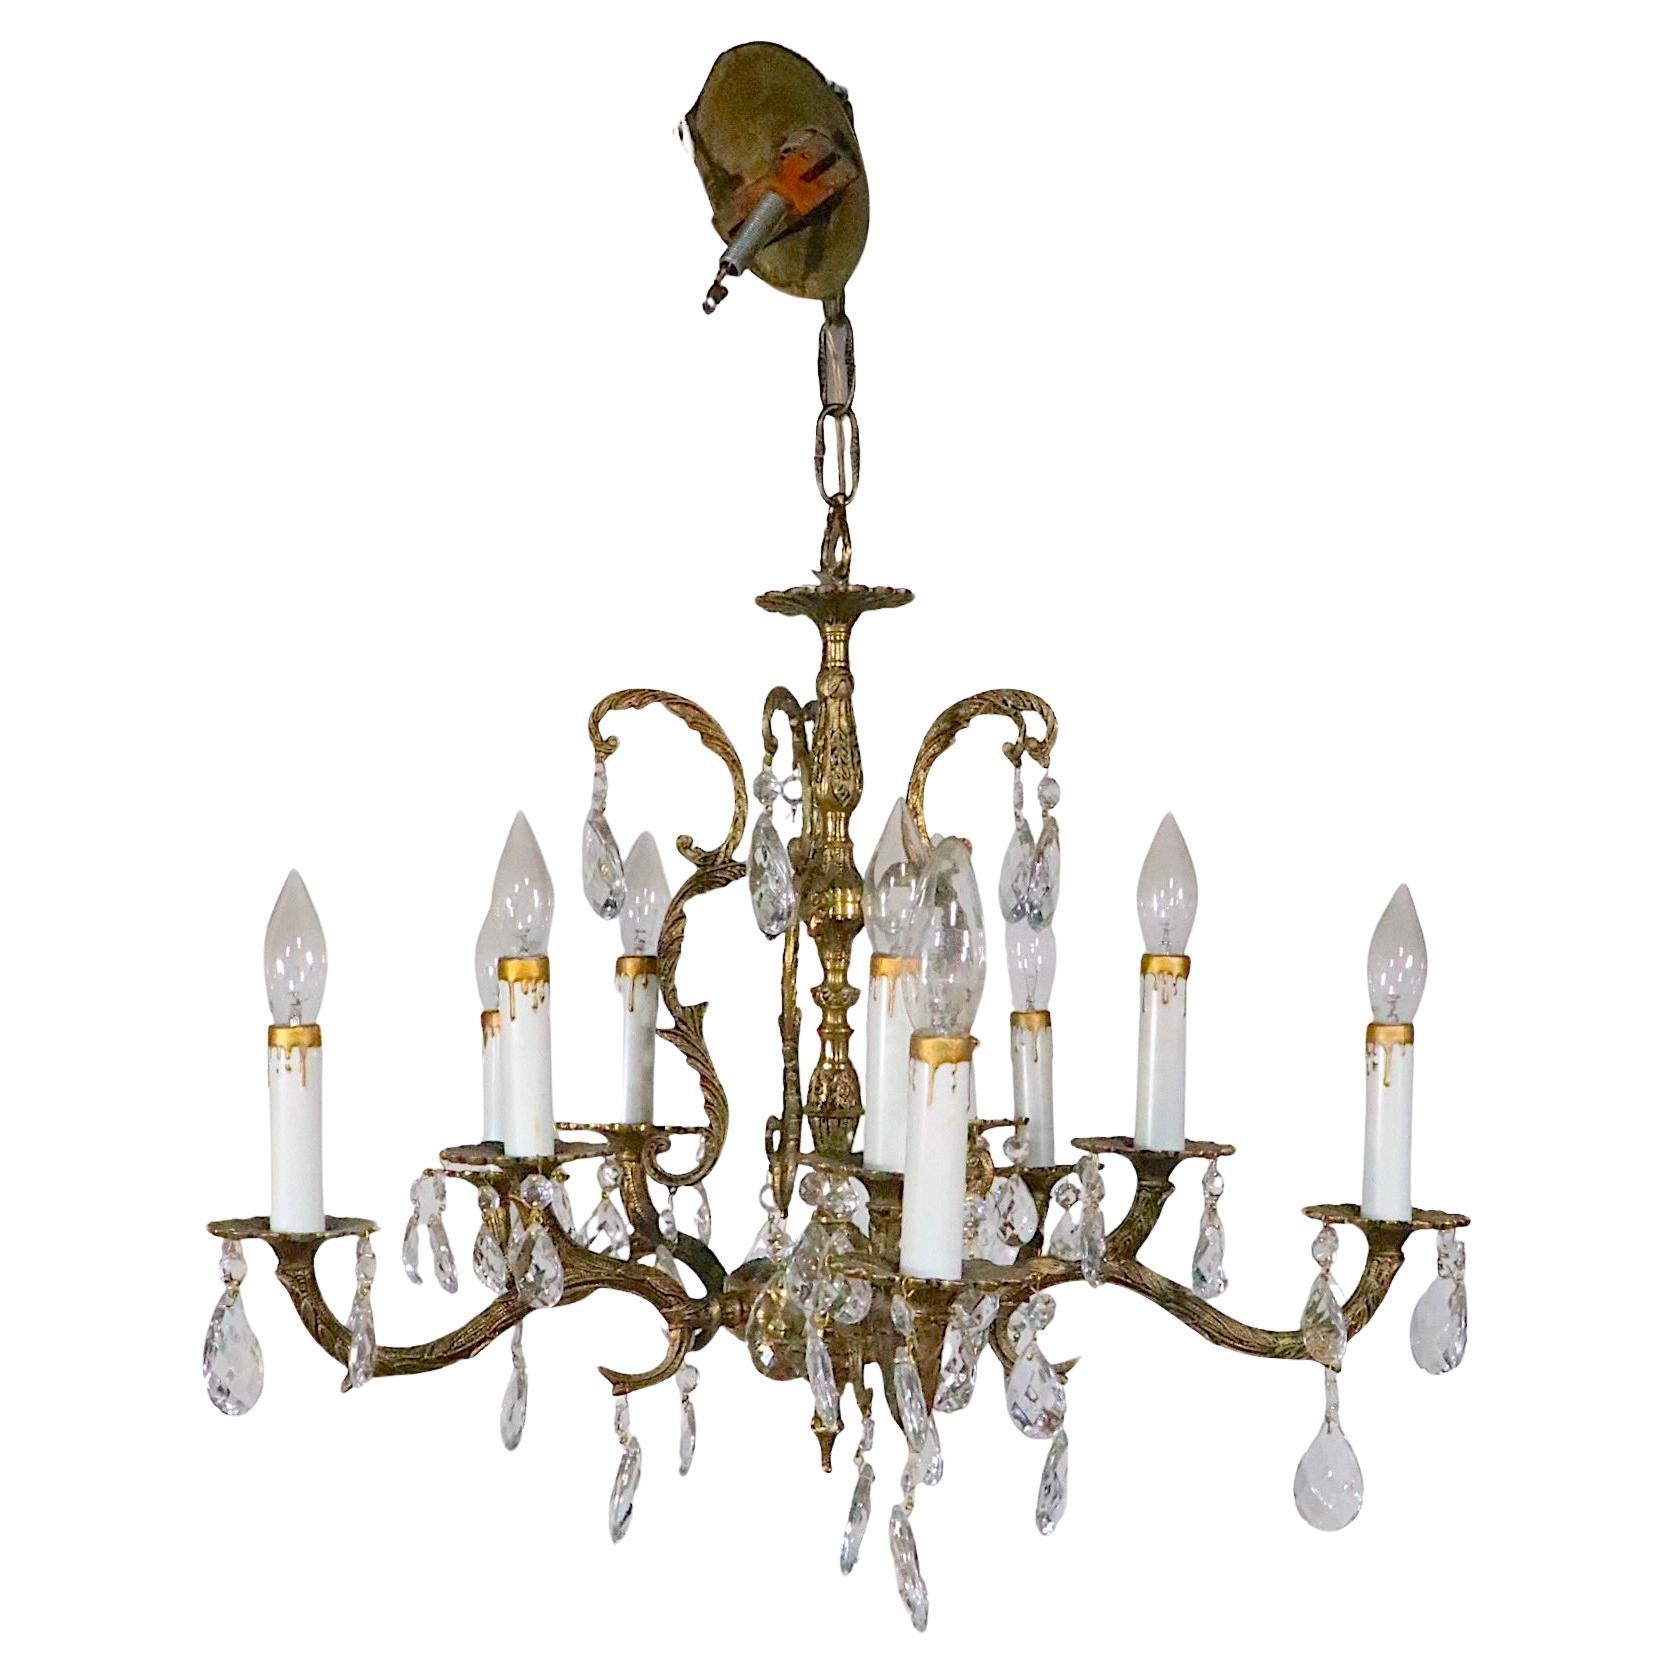 Ornate Cast Brass and Crystal  10 Light Chandelier Made in Spain c 1950's For Sale